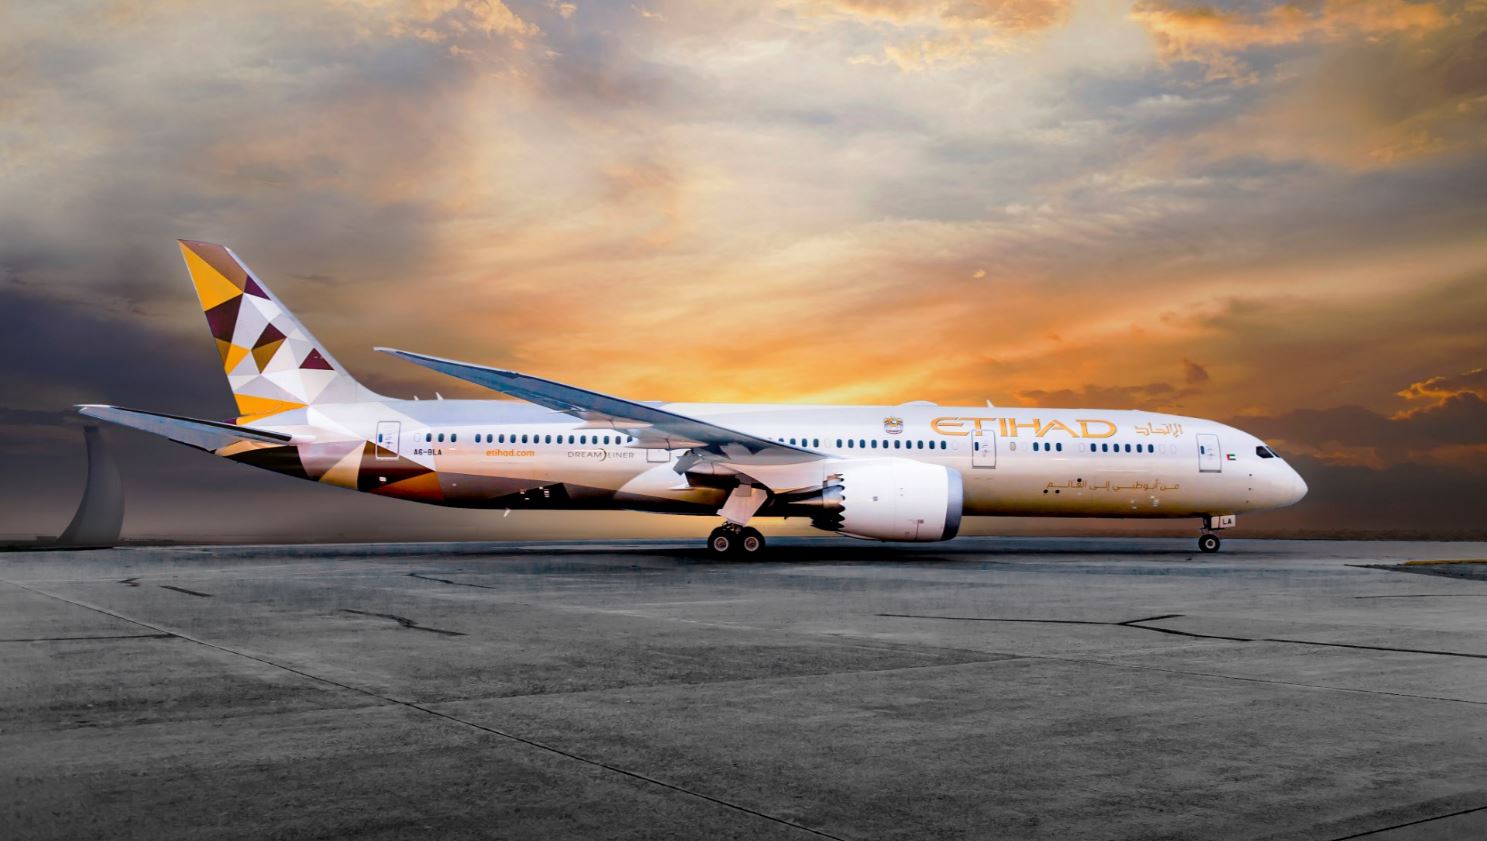 Etihad And Boeing Strengthen Strategic Partnership With Maintenance Support For Boeing 787 Fleet